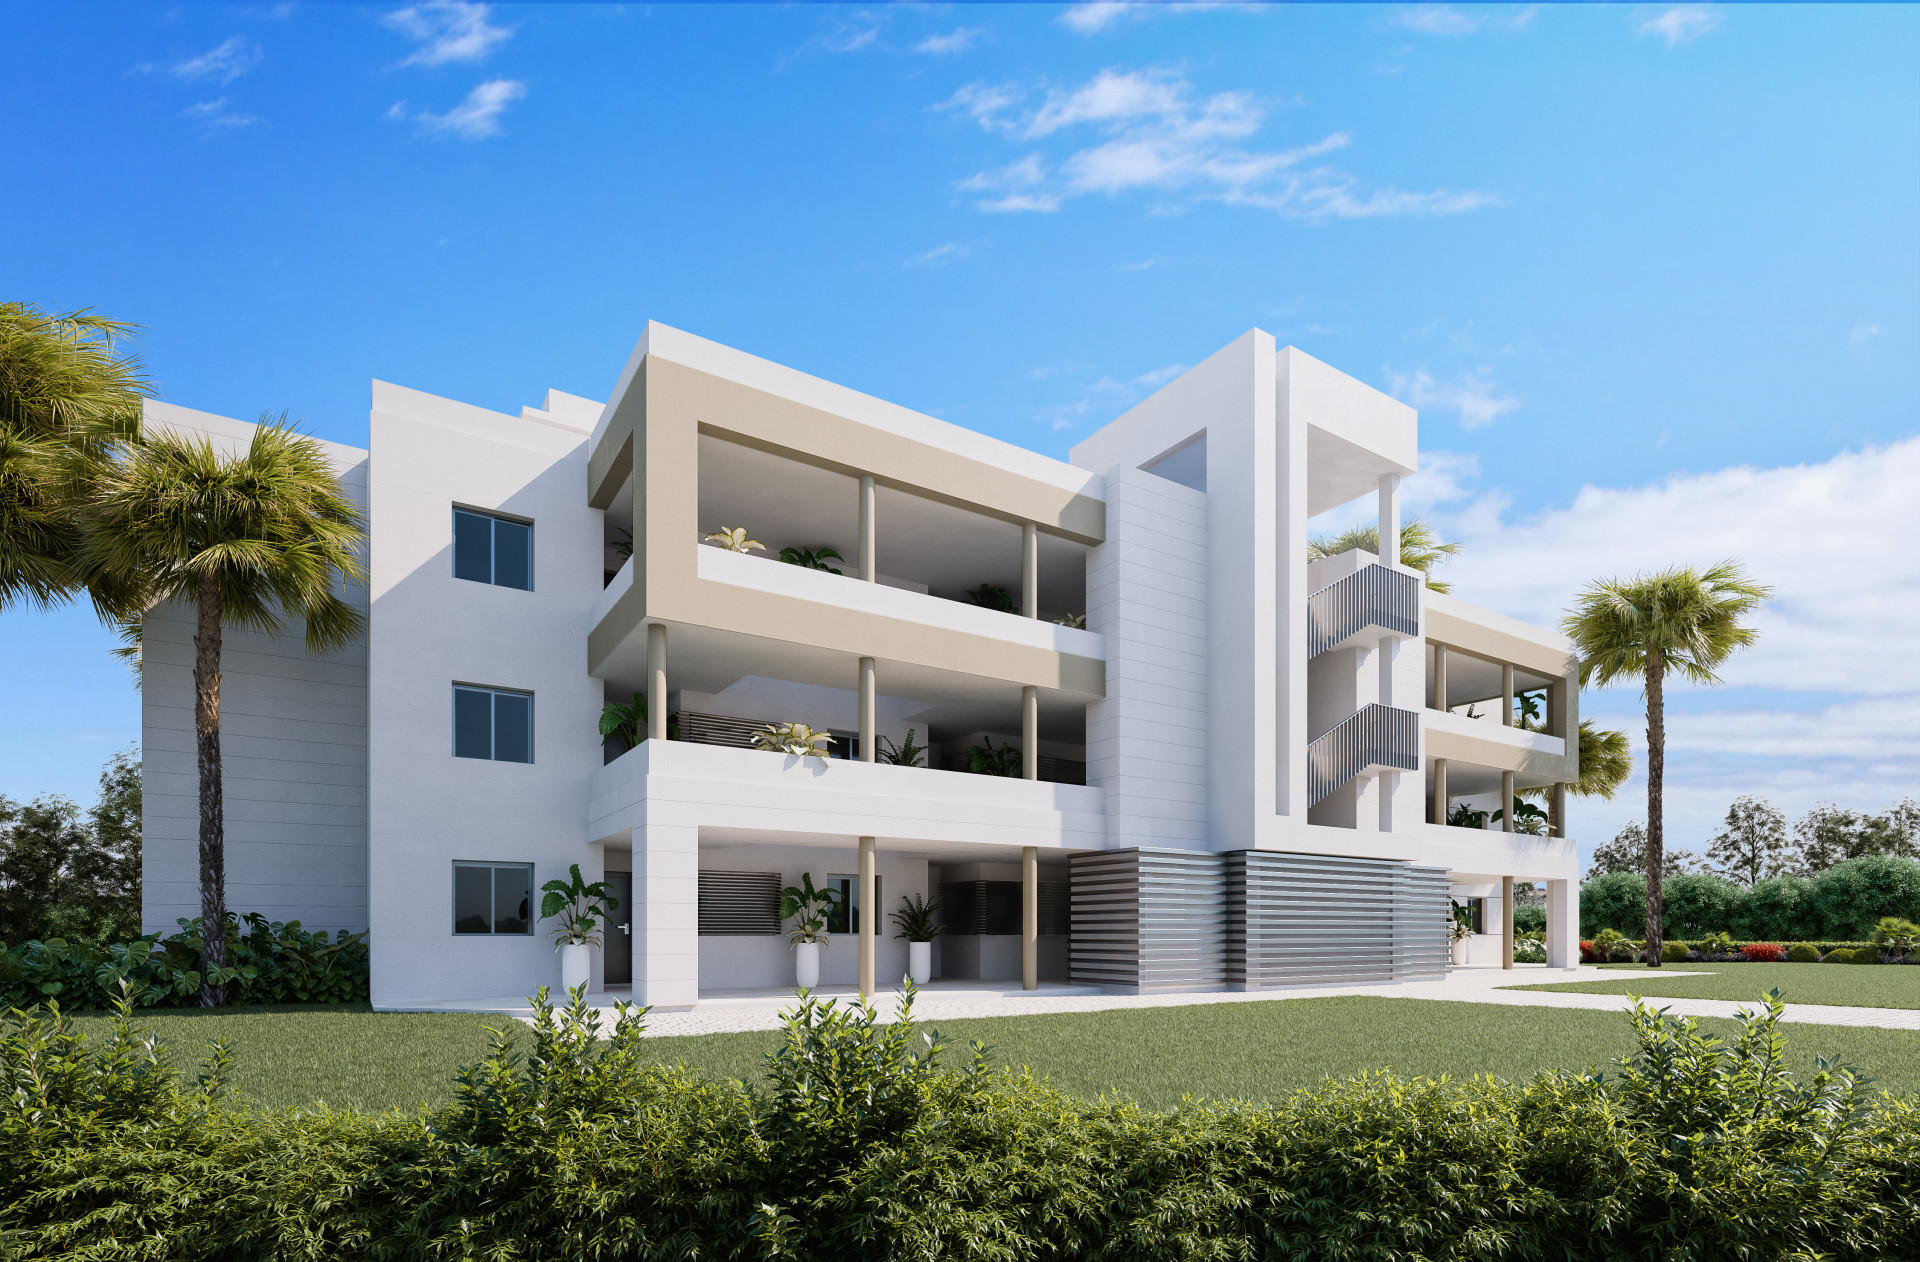 Dream Golf Calanova: Luxury residential project located on the first line of the Calanova golf course in the municipality of Mijas, Malaga. | Image 0